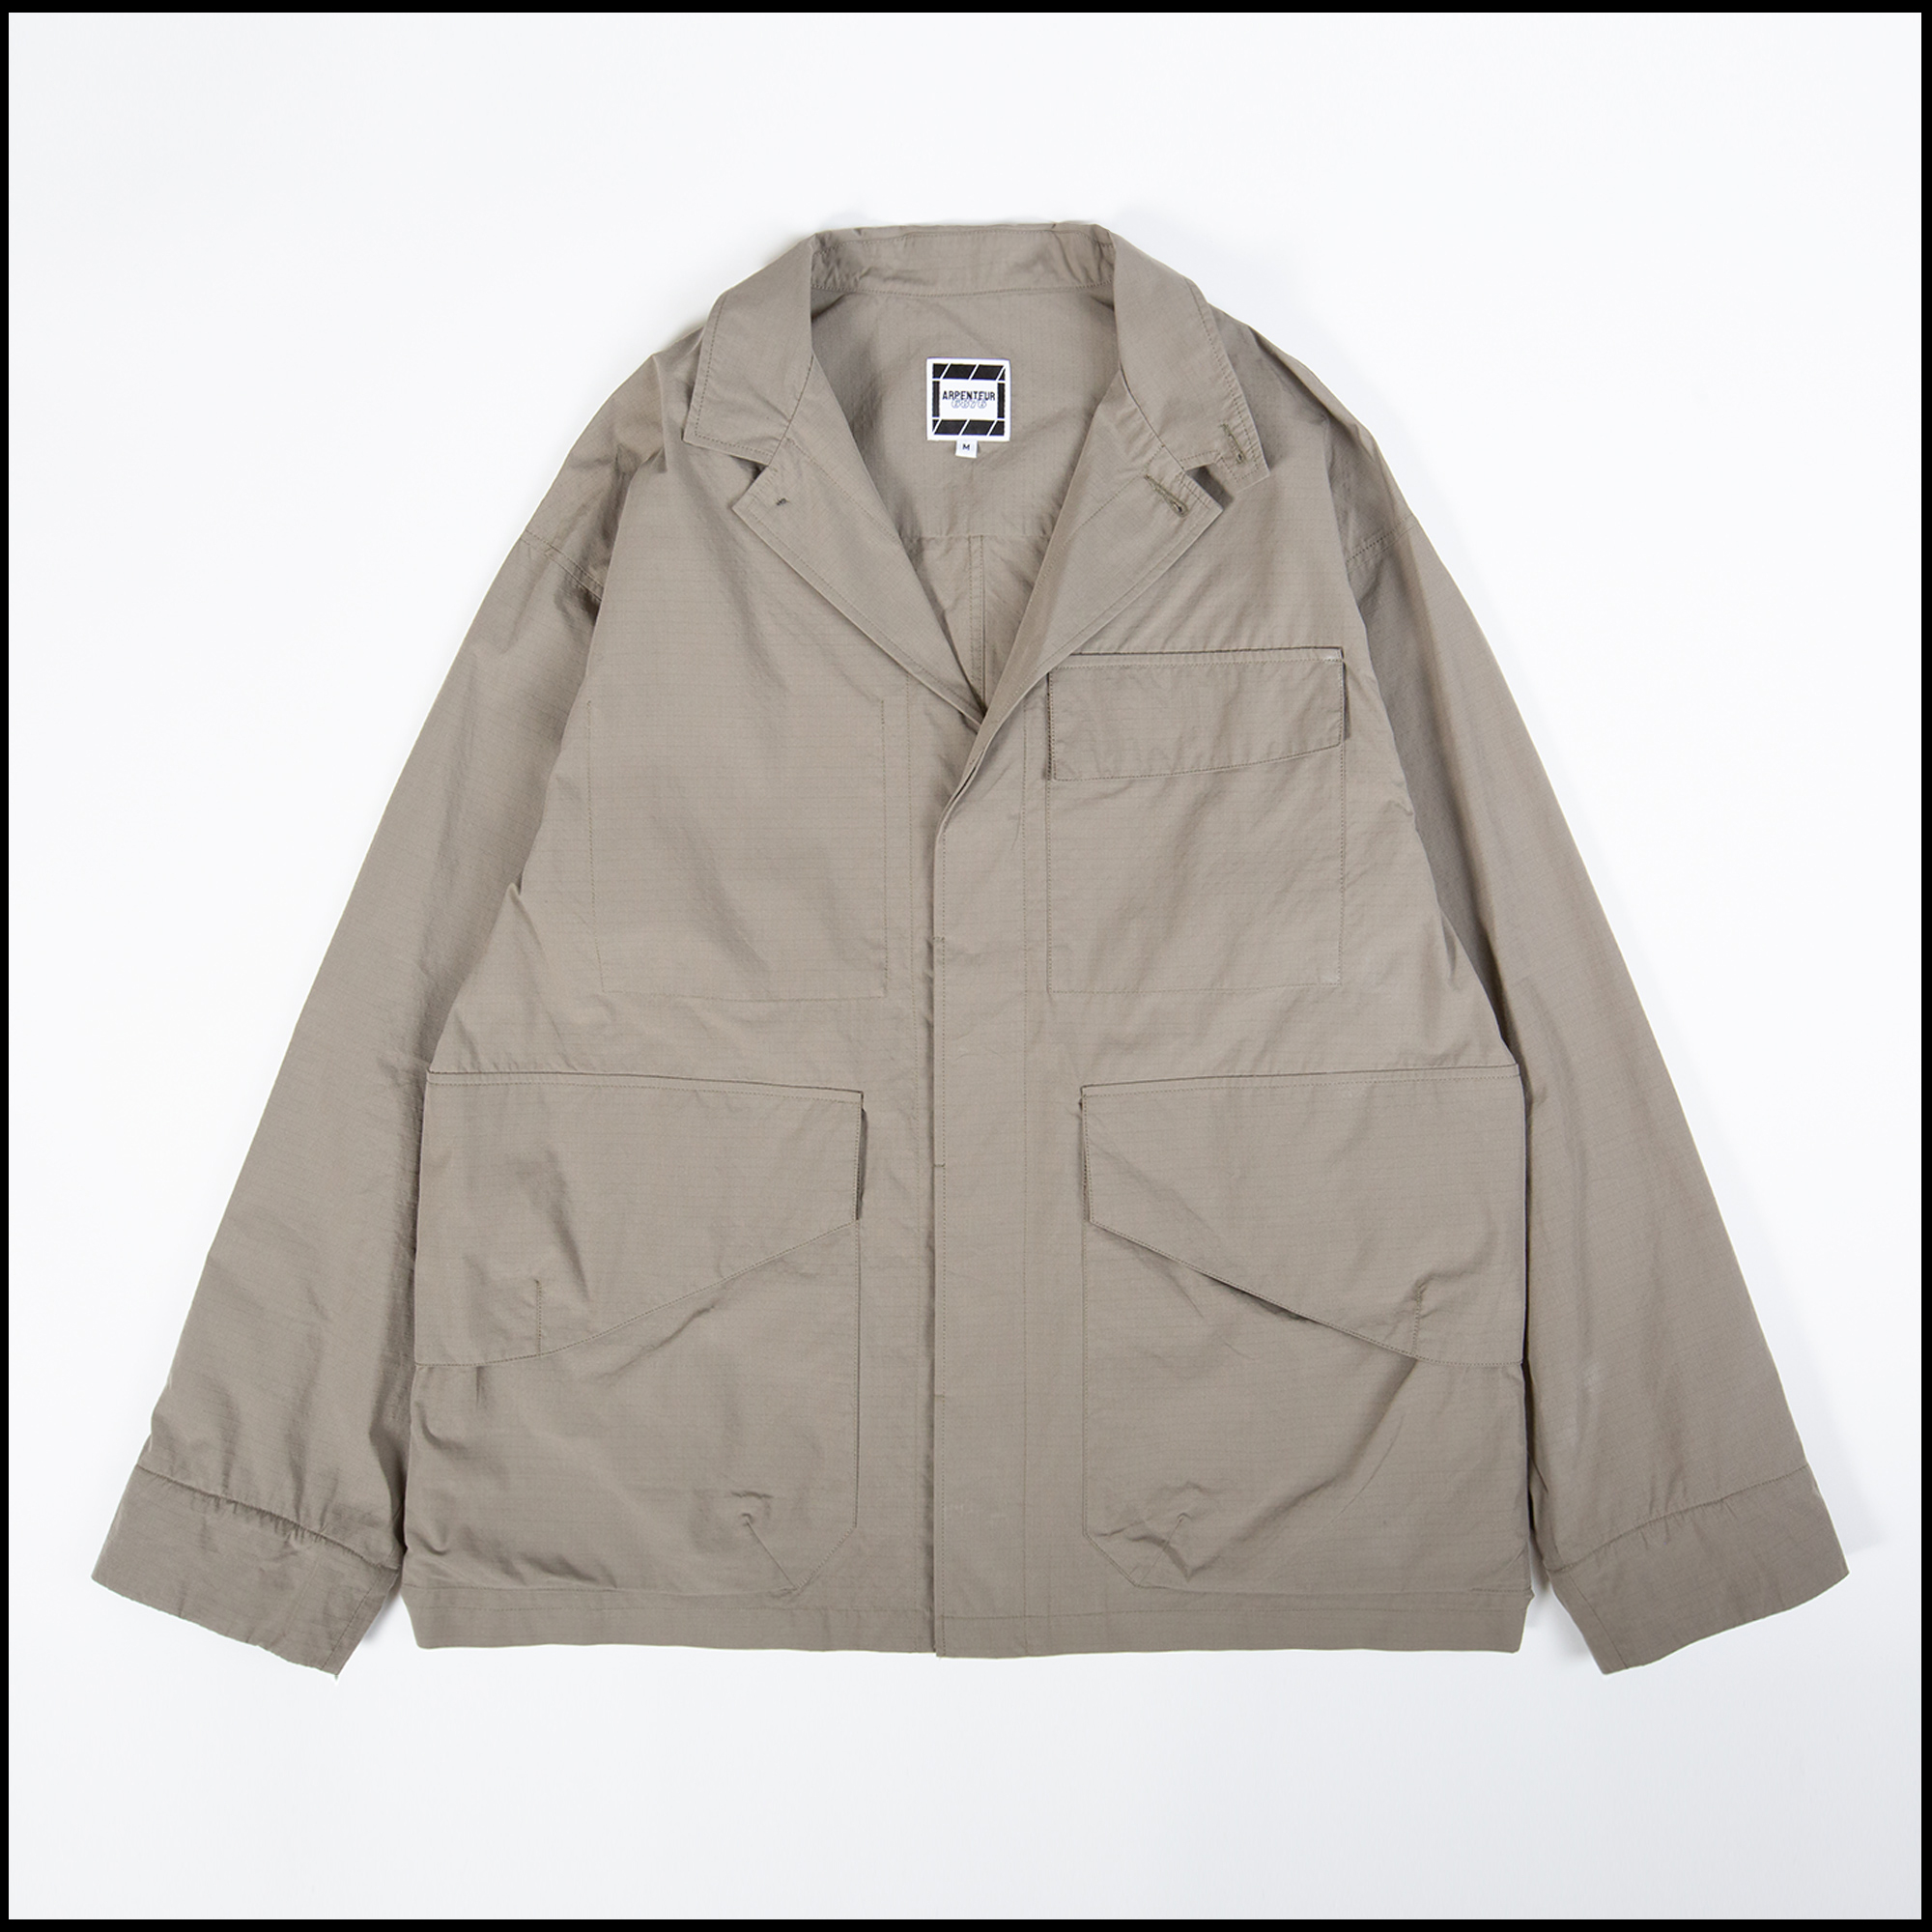 OCEANIC jacket in Olive color by Arpenteur and 6876